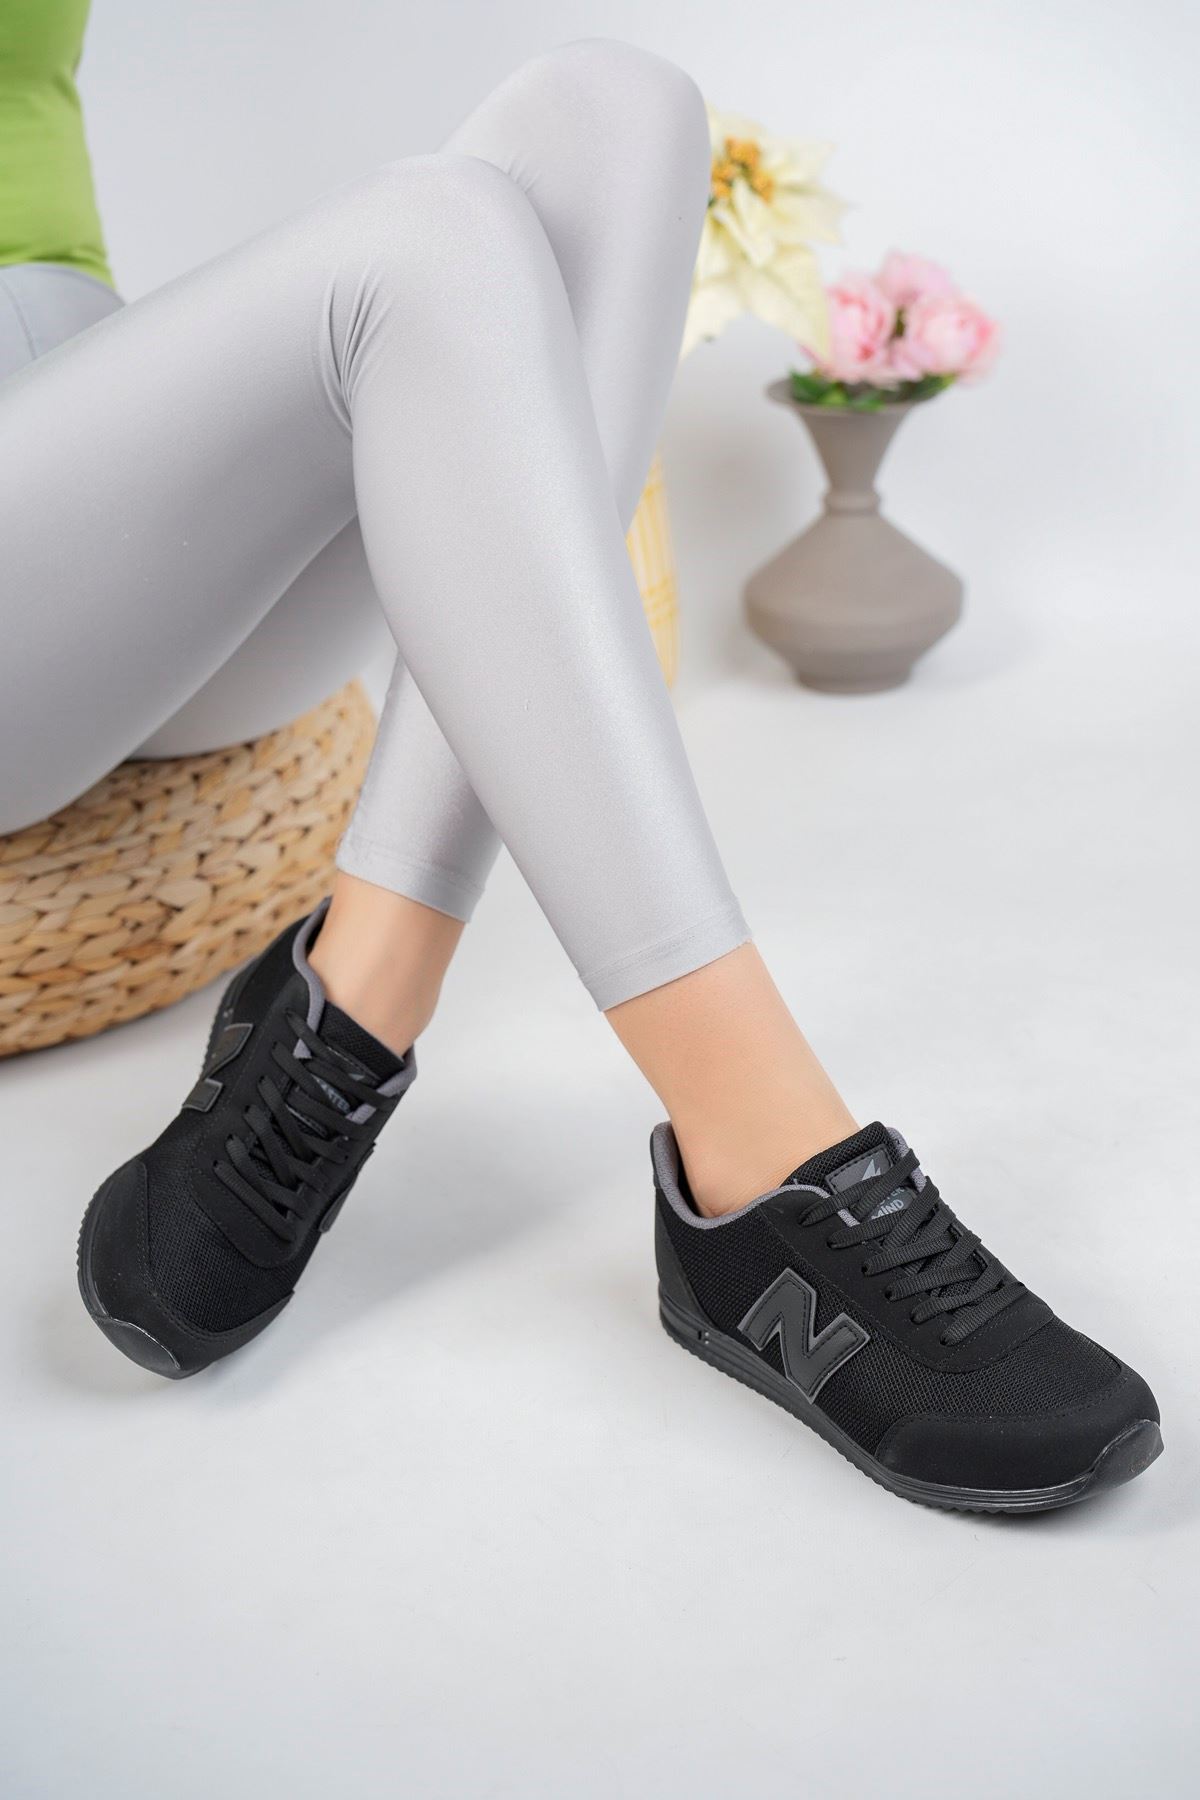 Black Women's Mesh Lace-Up Sneakers